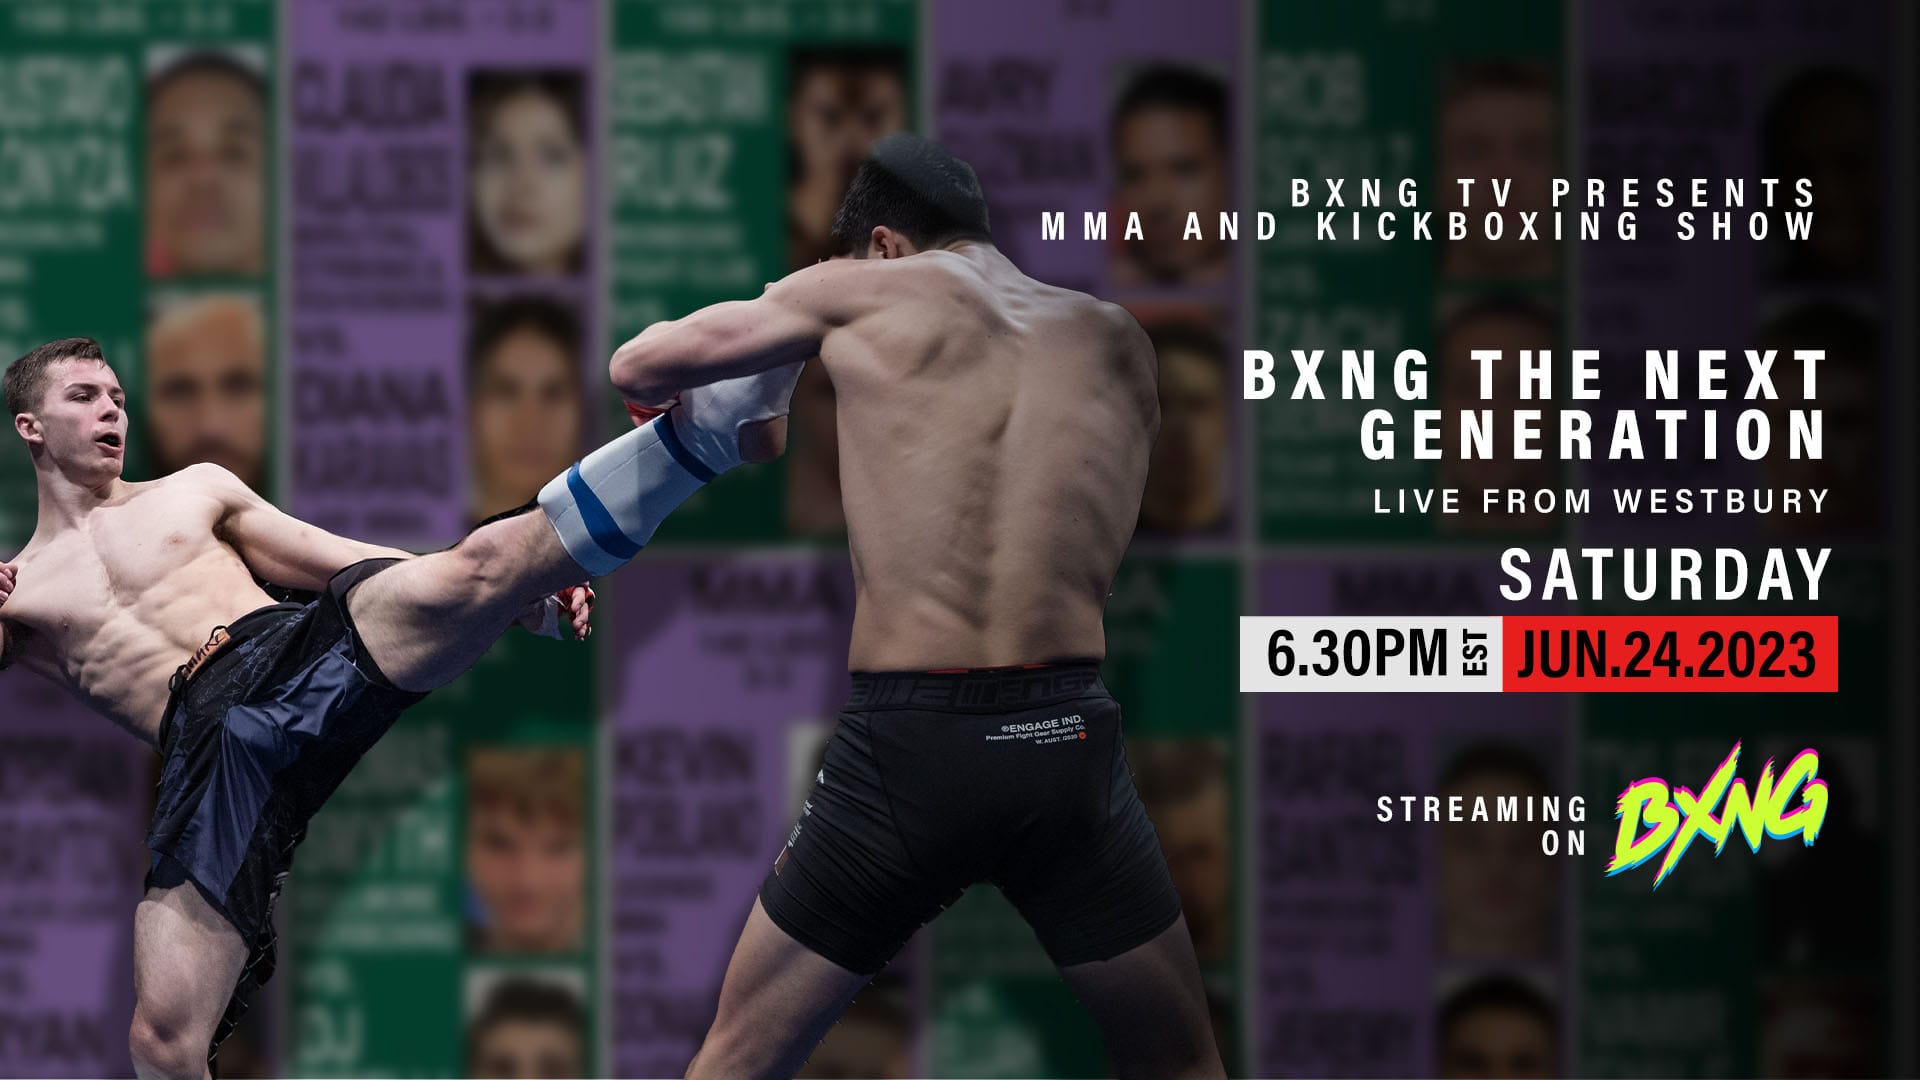 BXNG TV Presents MMA and Kickboxing Show Live Stream 06/24/23